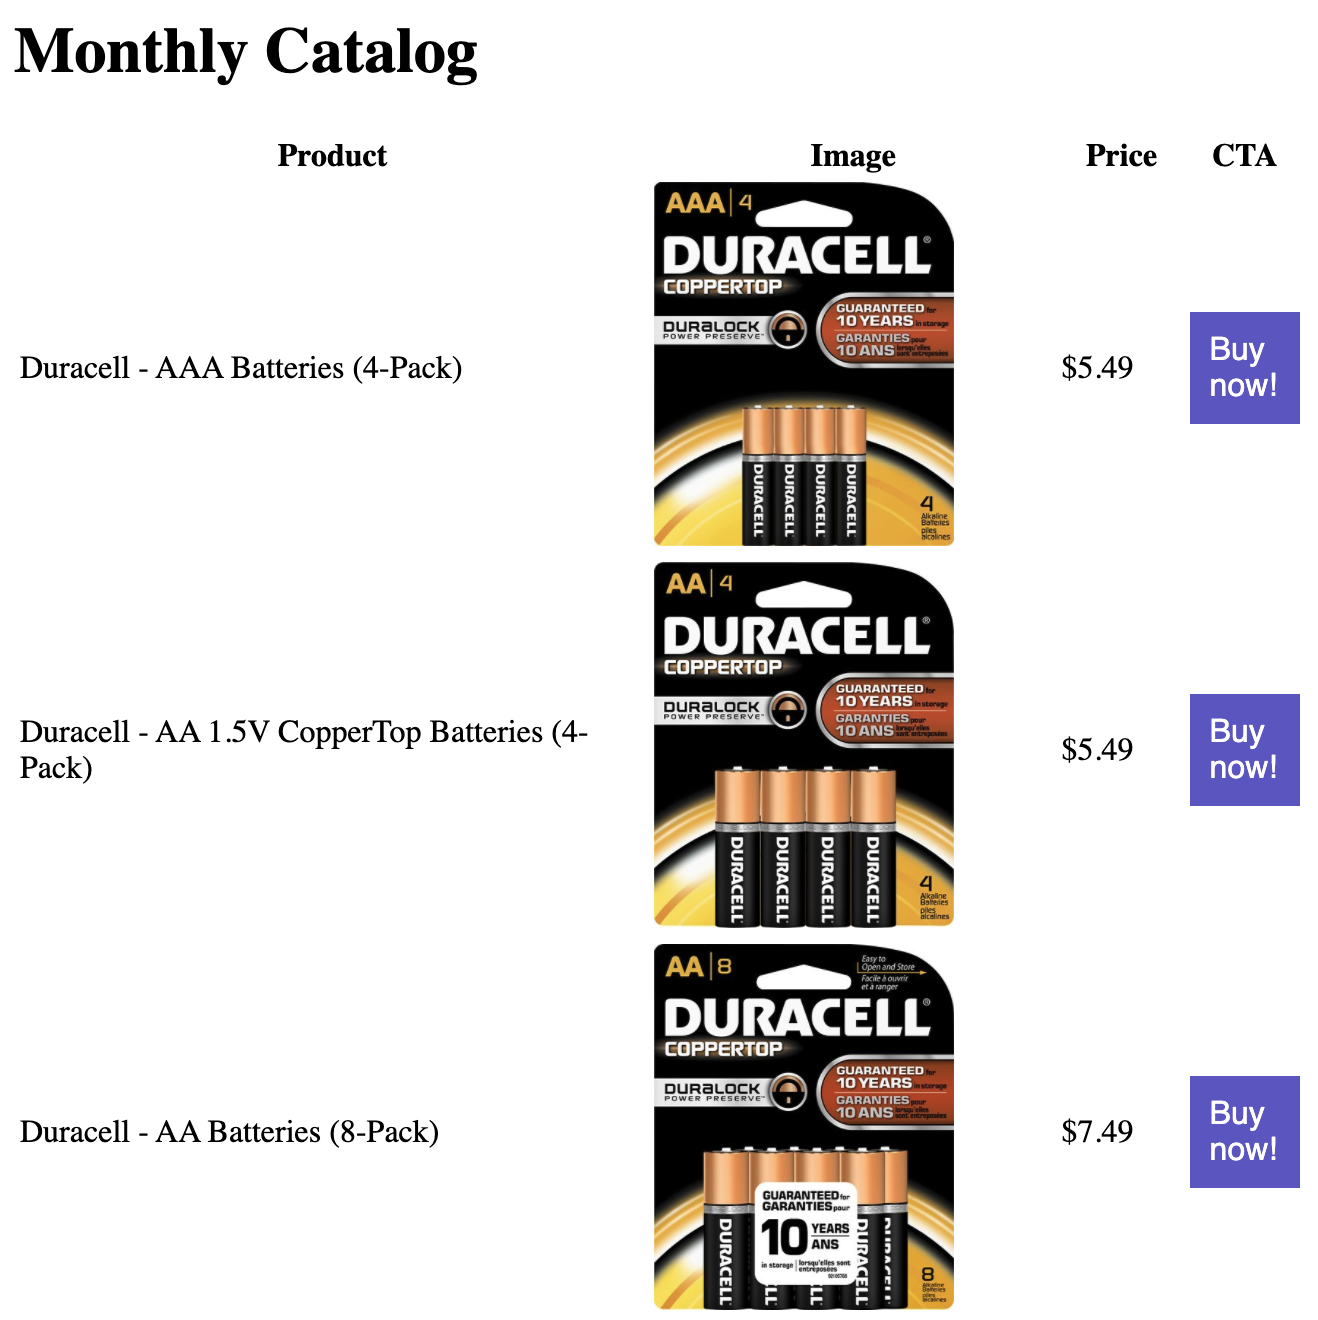 Image of a partial email, titled "Monthly Catalog". The email contains a table four columns labeled "Product", "Image",  "Price", and "CTA". The first four rows of the table are shown, and include names, images, prices, and purple "Buy now!" buttons for miscellaneous batteries.